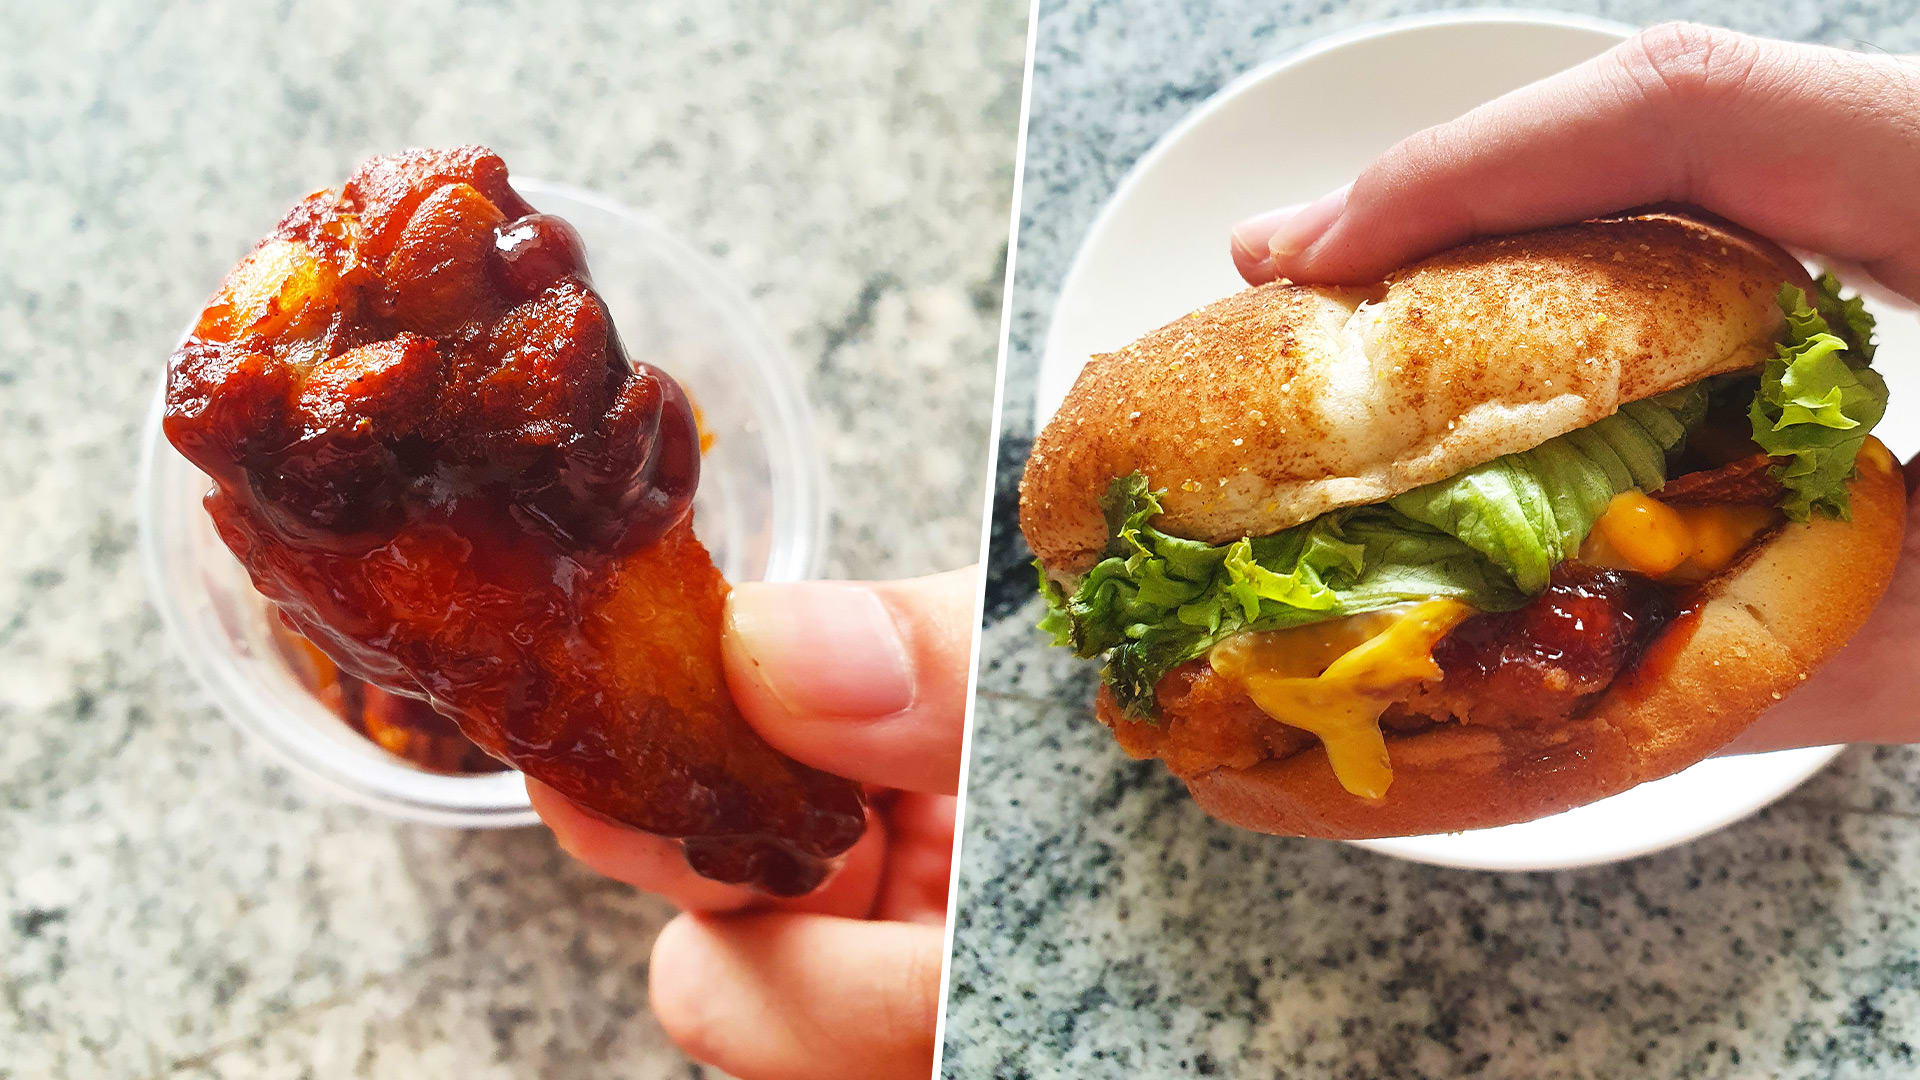 Burger King’s Korean-Inspired “Dynamite” Spicy Chicken Burger Is Seriously Hot